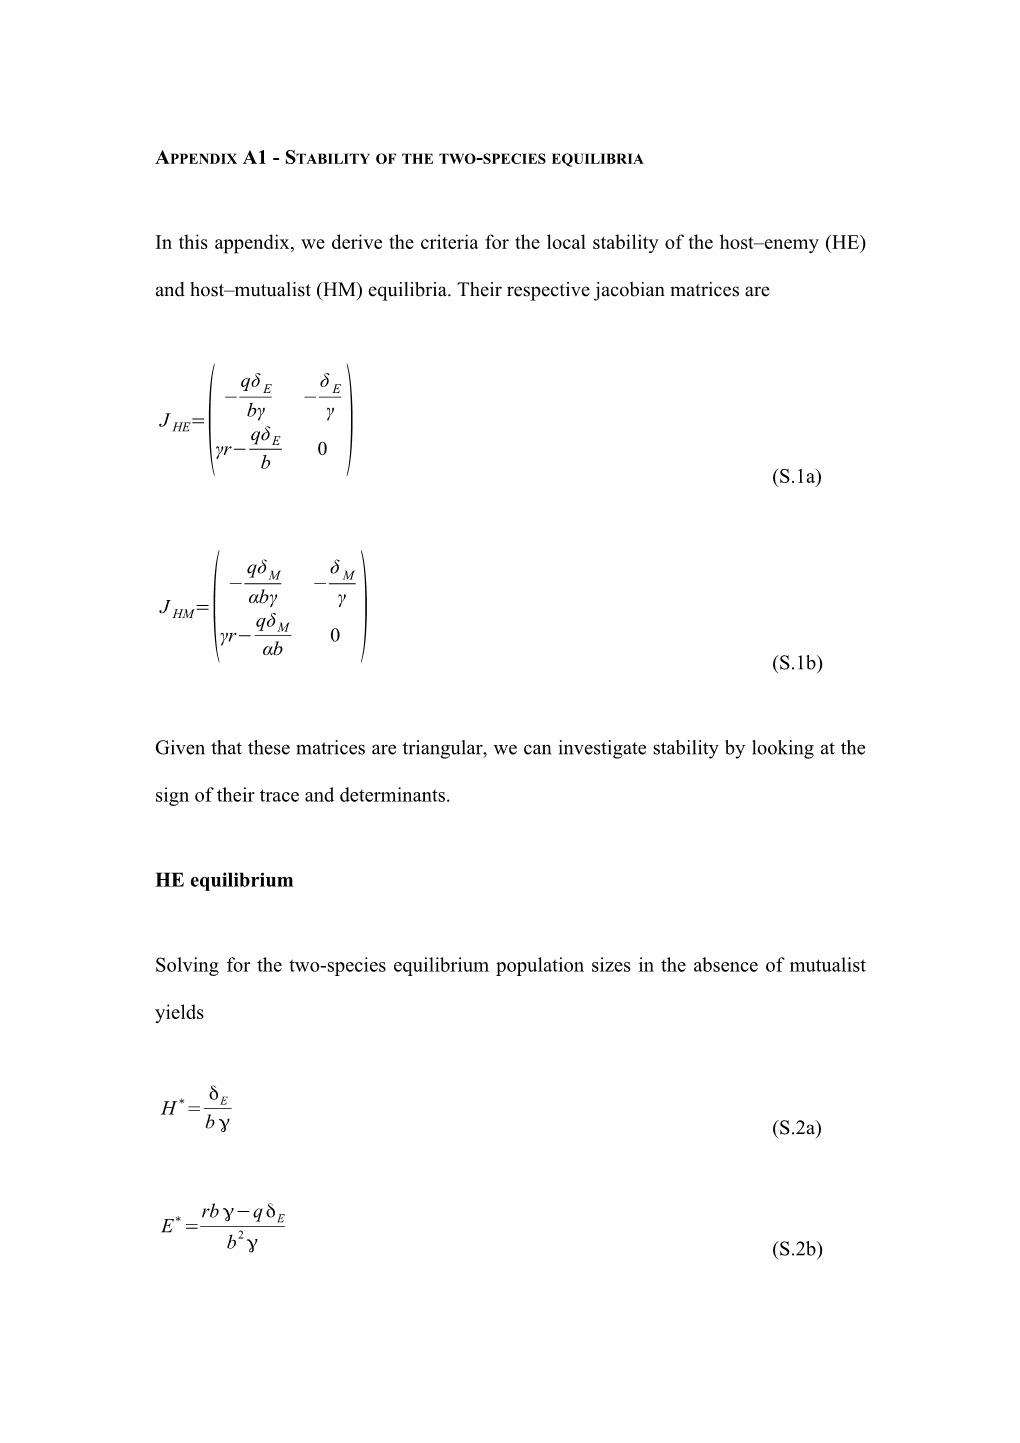 Appendix 1 - Stability of the Two-Species Equilibria